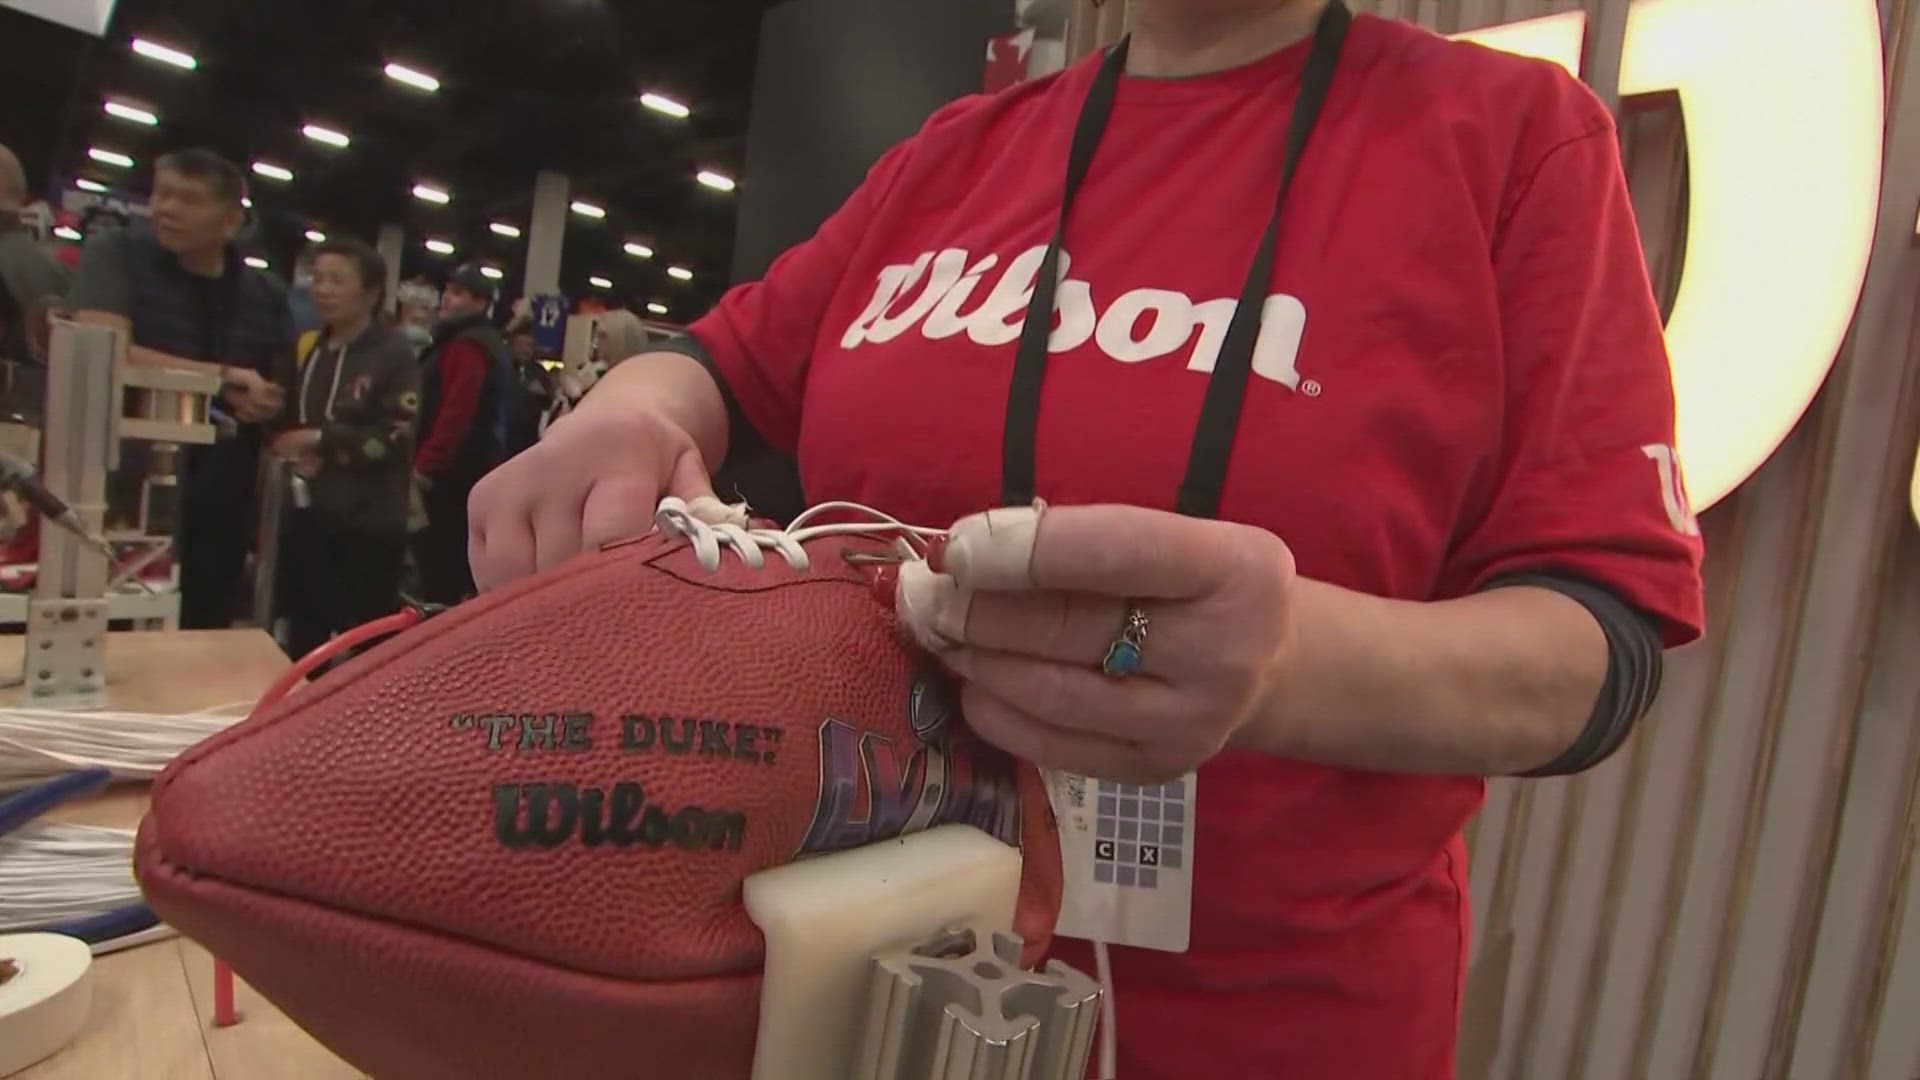 Wilson shows how NFL footballs are made ahead of the Super Bowl in Las Vegas.